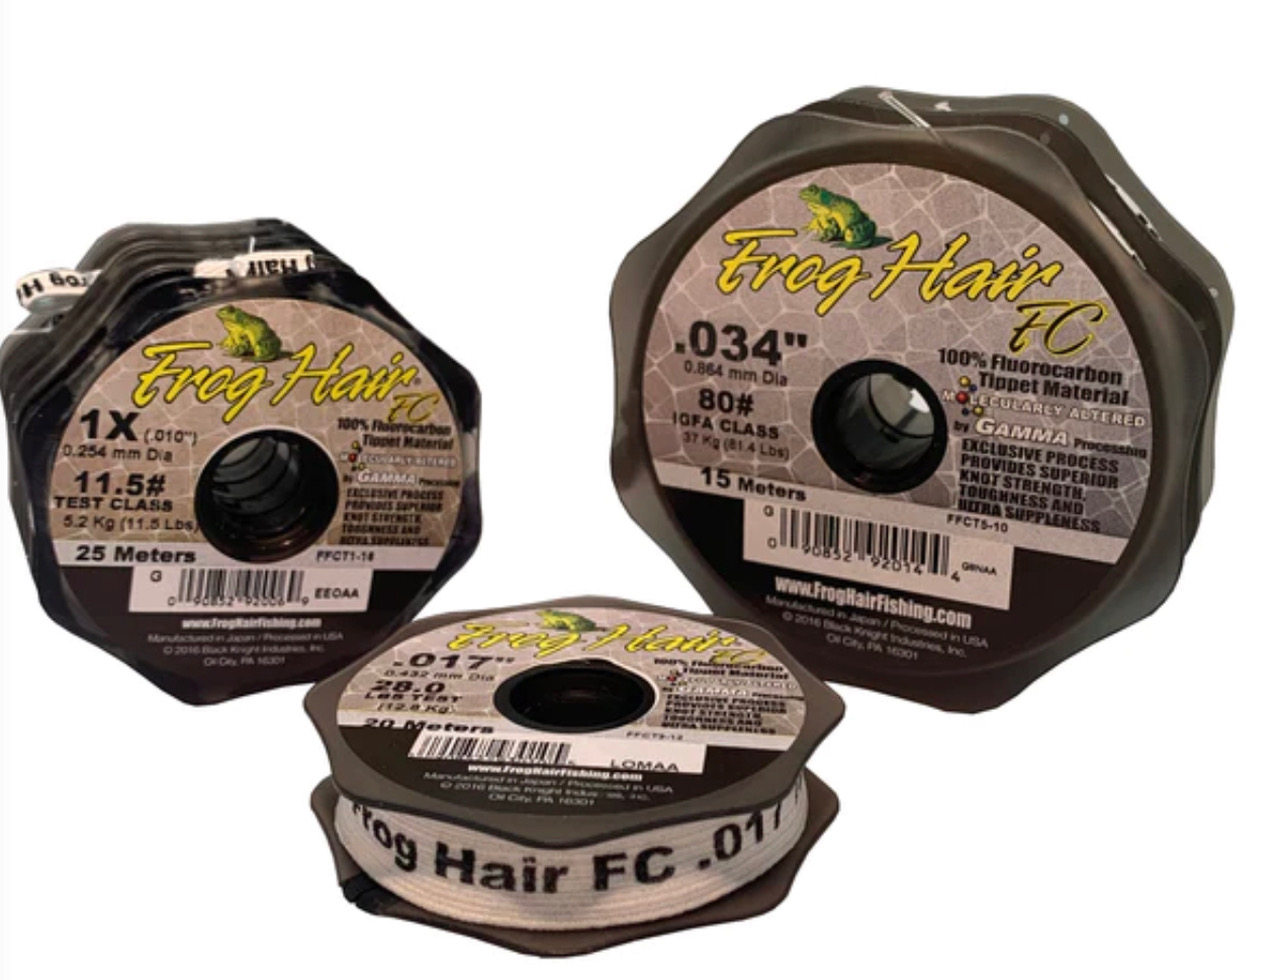 Frog Hair Fluorocarbon Tippet - 100m Guide Spool - 3X - 8.8lb